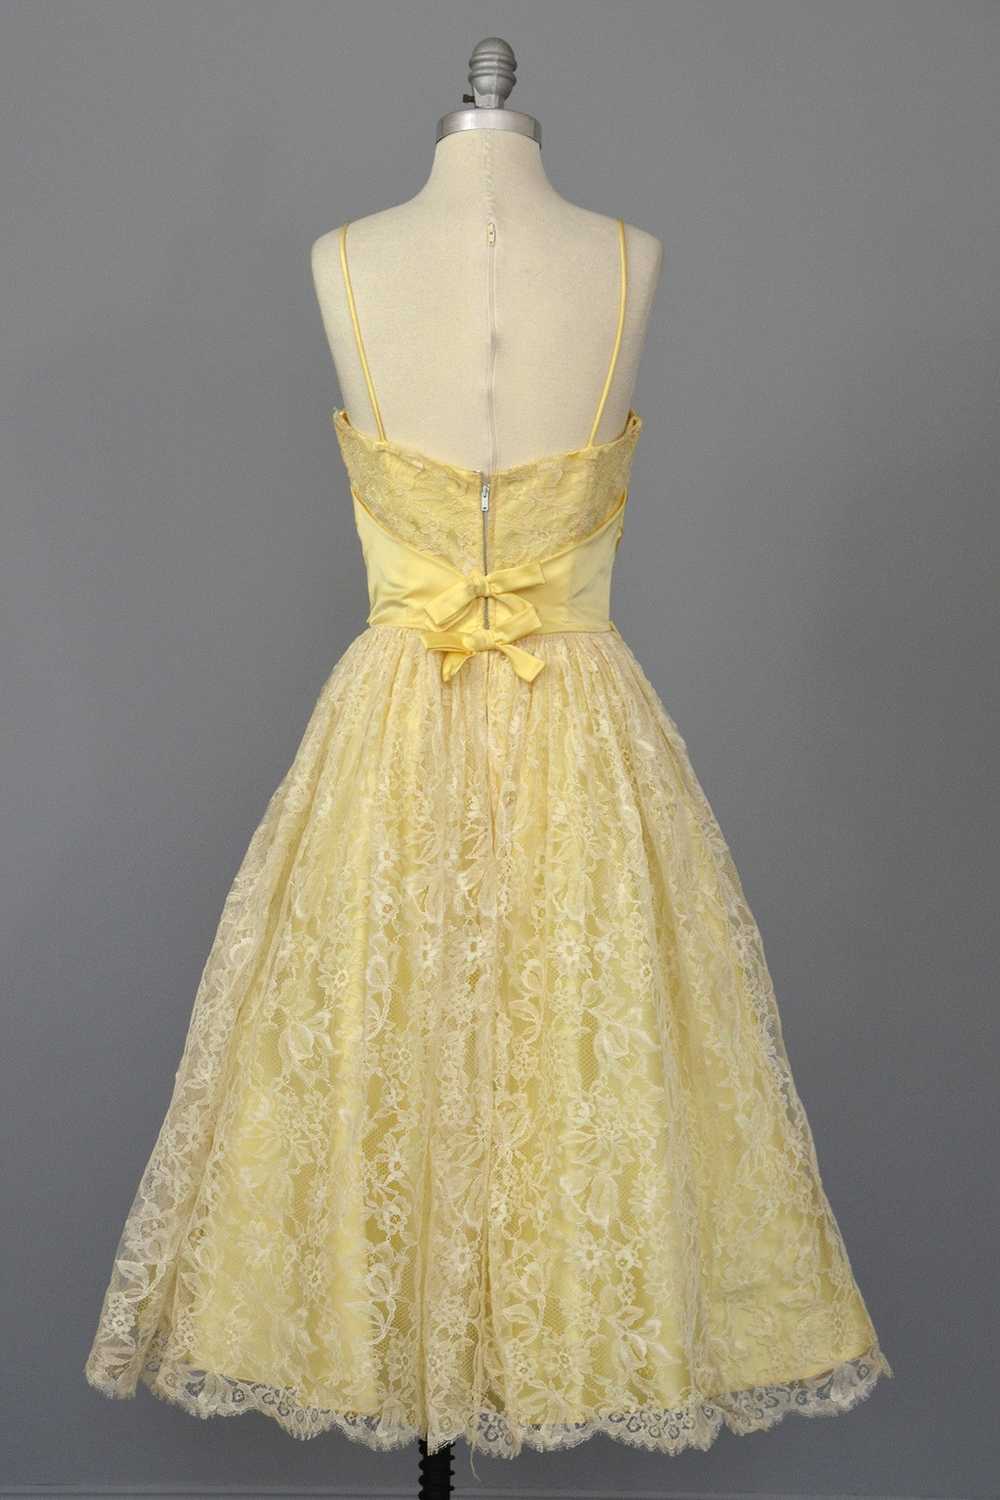 1950s White Lace Buttercup Party Prom Dress - image 3